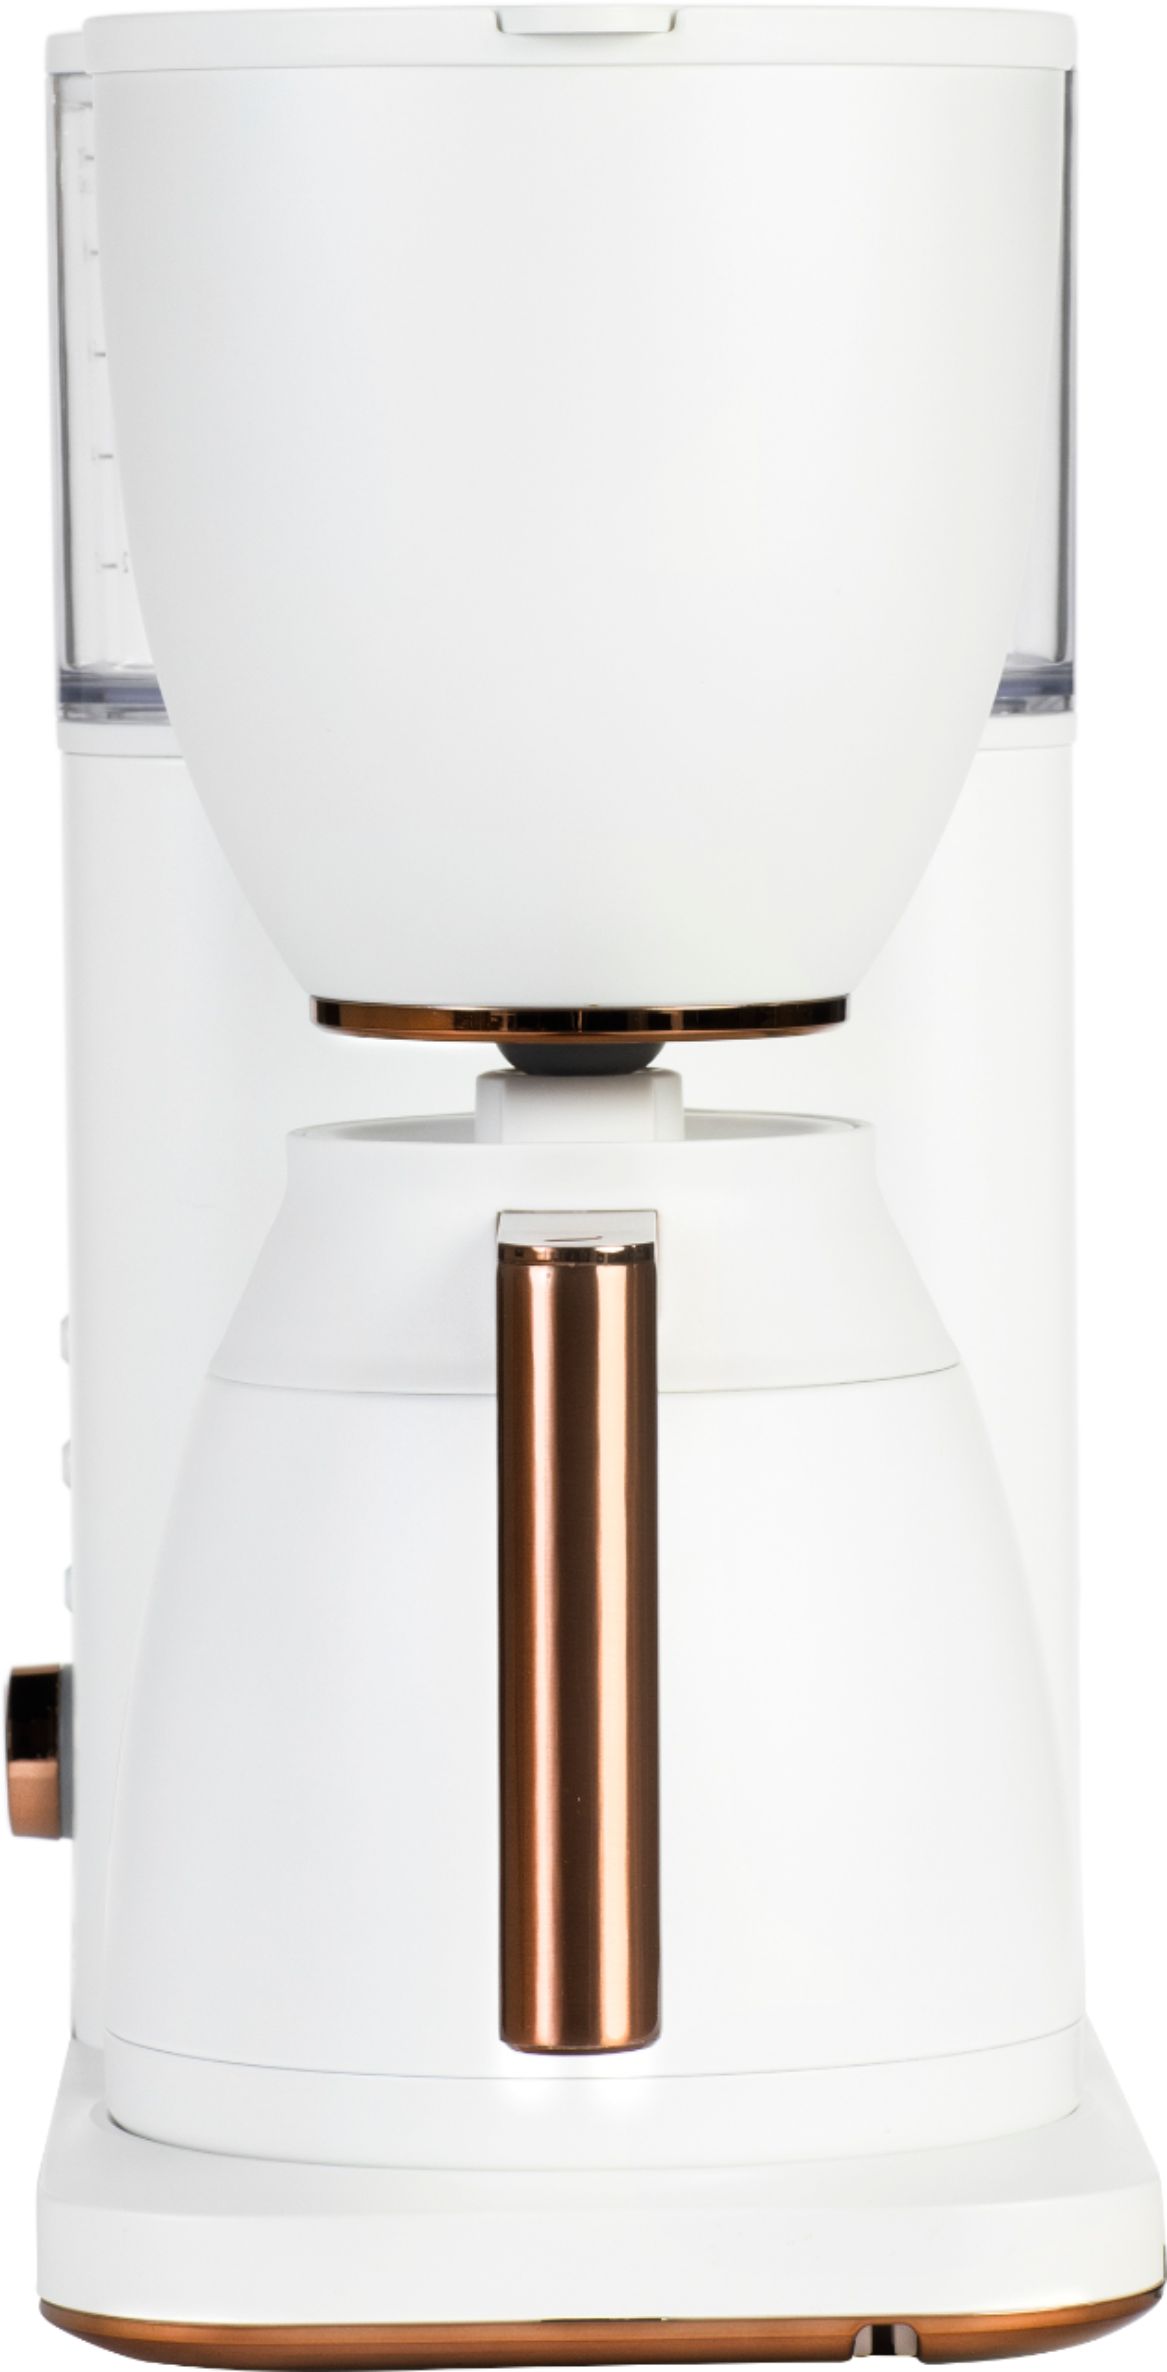 GE Cafe Matte White 10-Cup Drip Coffee Maker with Thermal Carafe + Reviews